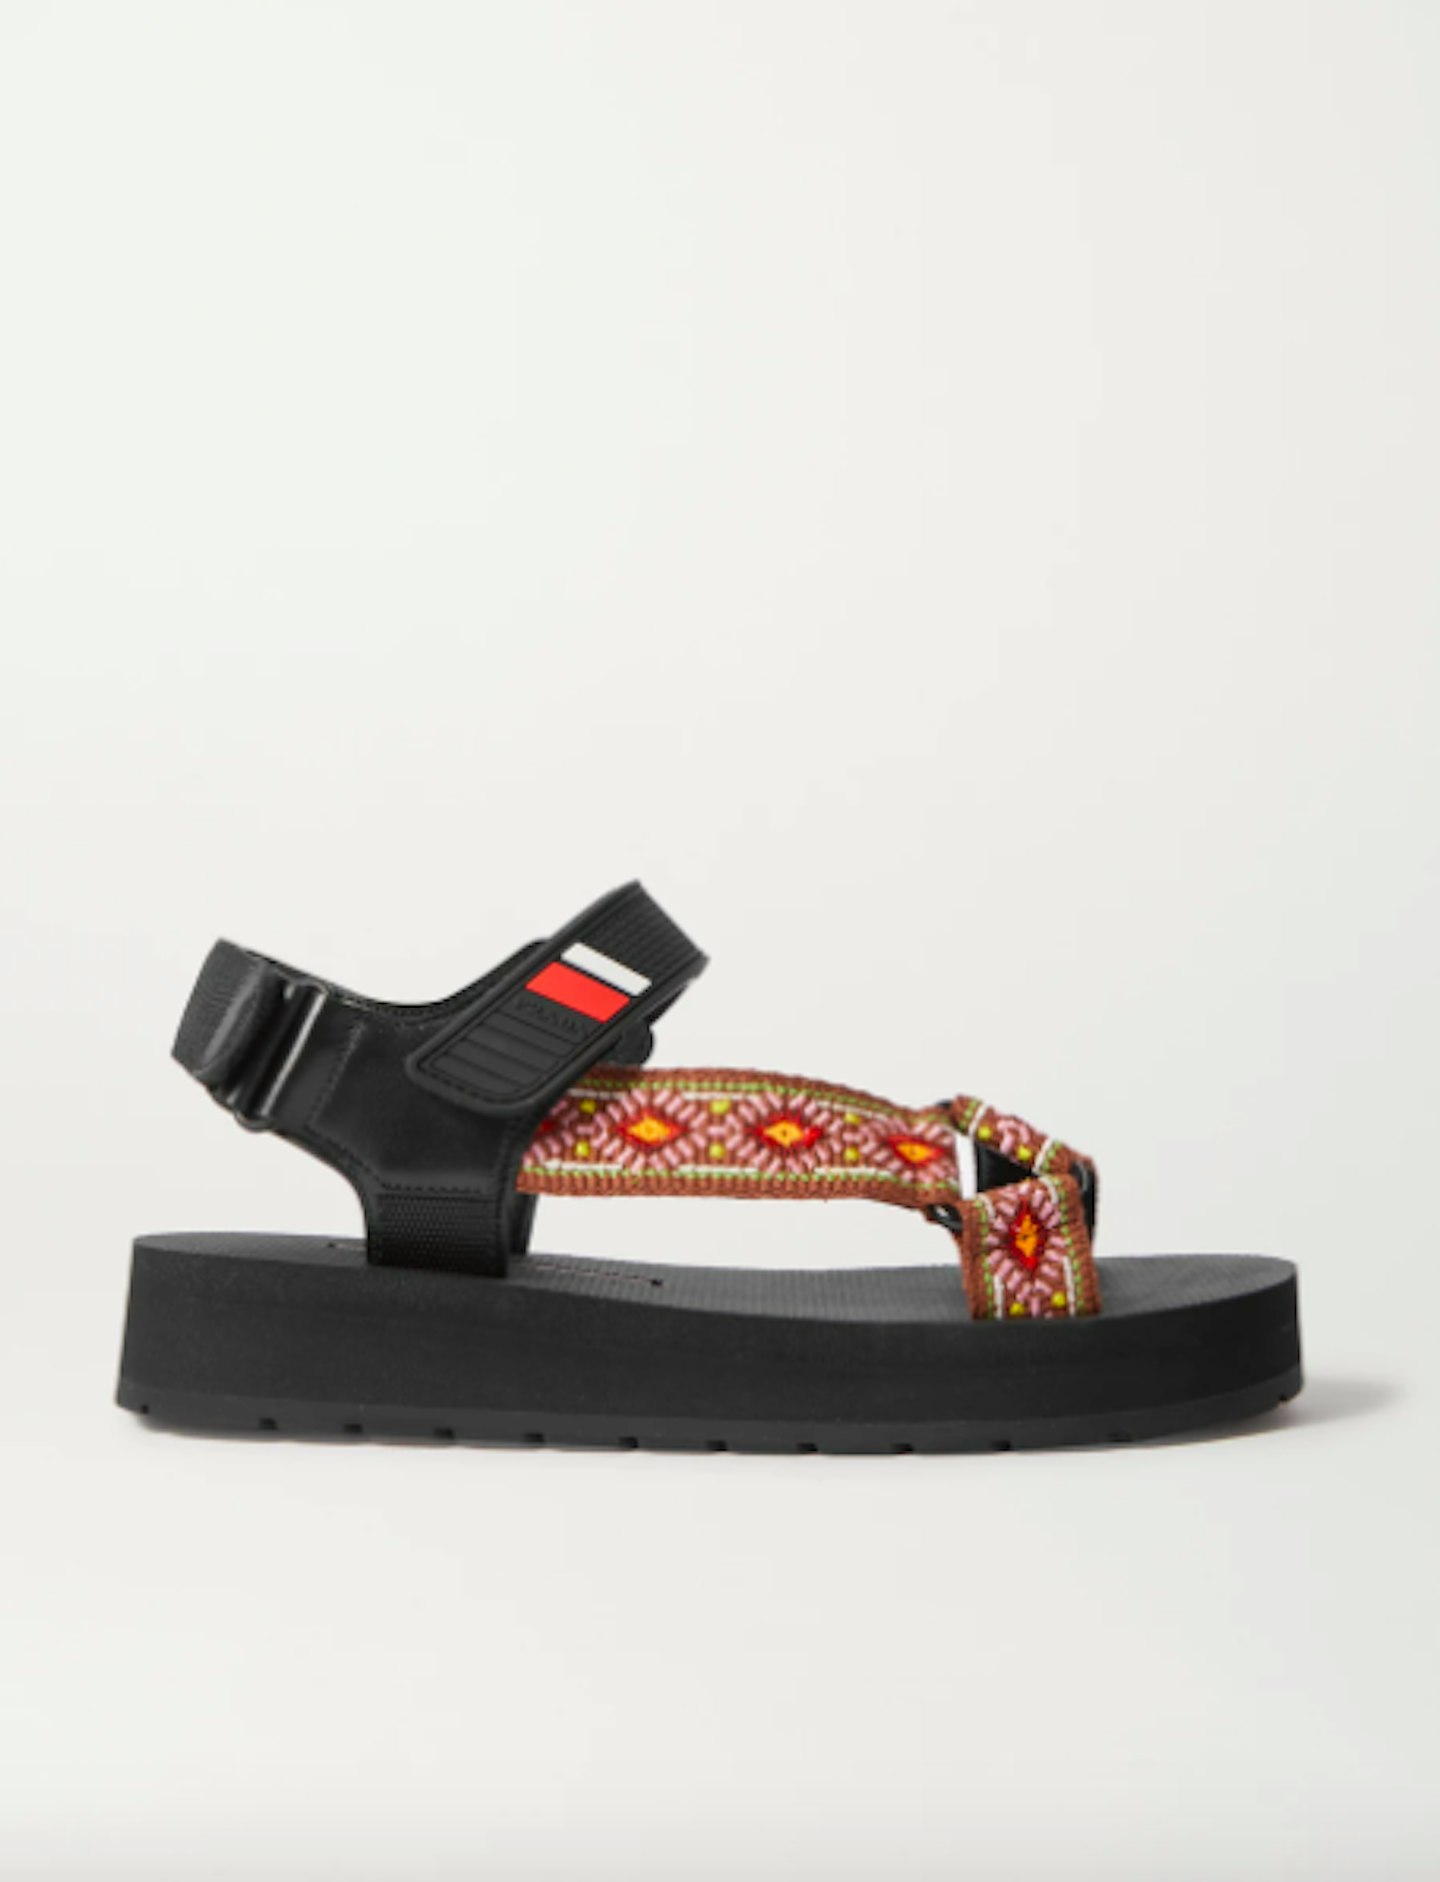 Prada, Logo Rubber And Leather Canvas Sandals, £460 at Net-a-Porter